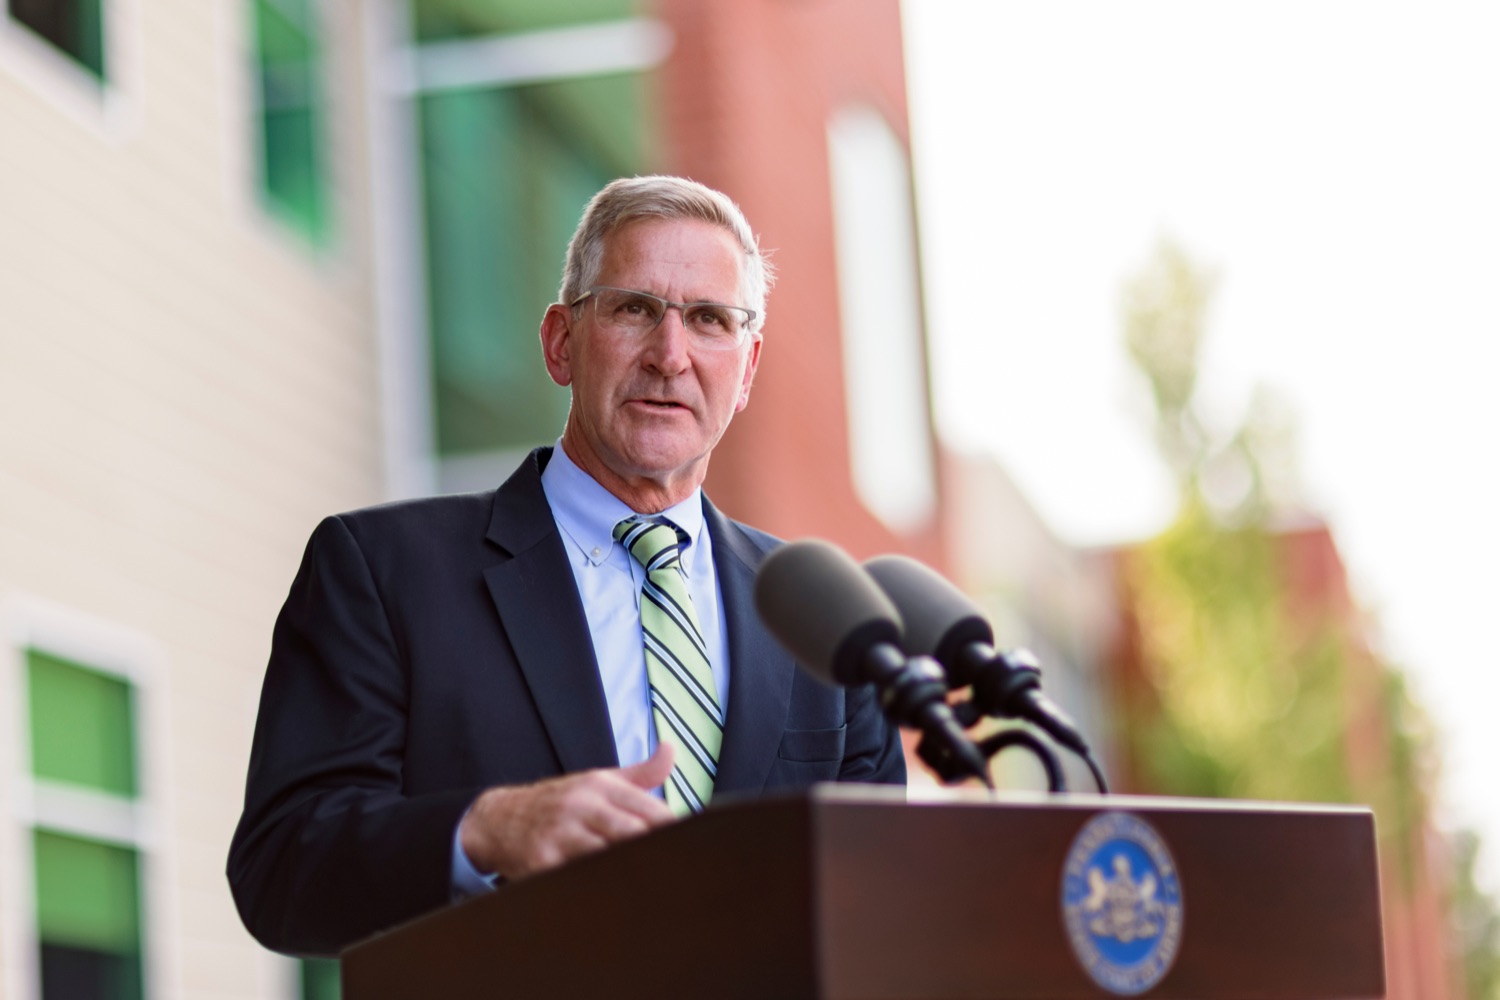 PA Dept. of Agriculture Secretary Russell Redding speaks during a press conference, which highlighted the success of Pennsylvania's farm to school programs, at Hill Top Academy in Mechanicsburg on Friday, August 27, 2021.<br><a href="https://filesource.amperwave.net/commonwealthofpa/photo/19054_AGRIC_FarmToSchool_NK_017.jpg" target="_blank">⇣ Download Photo</a>